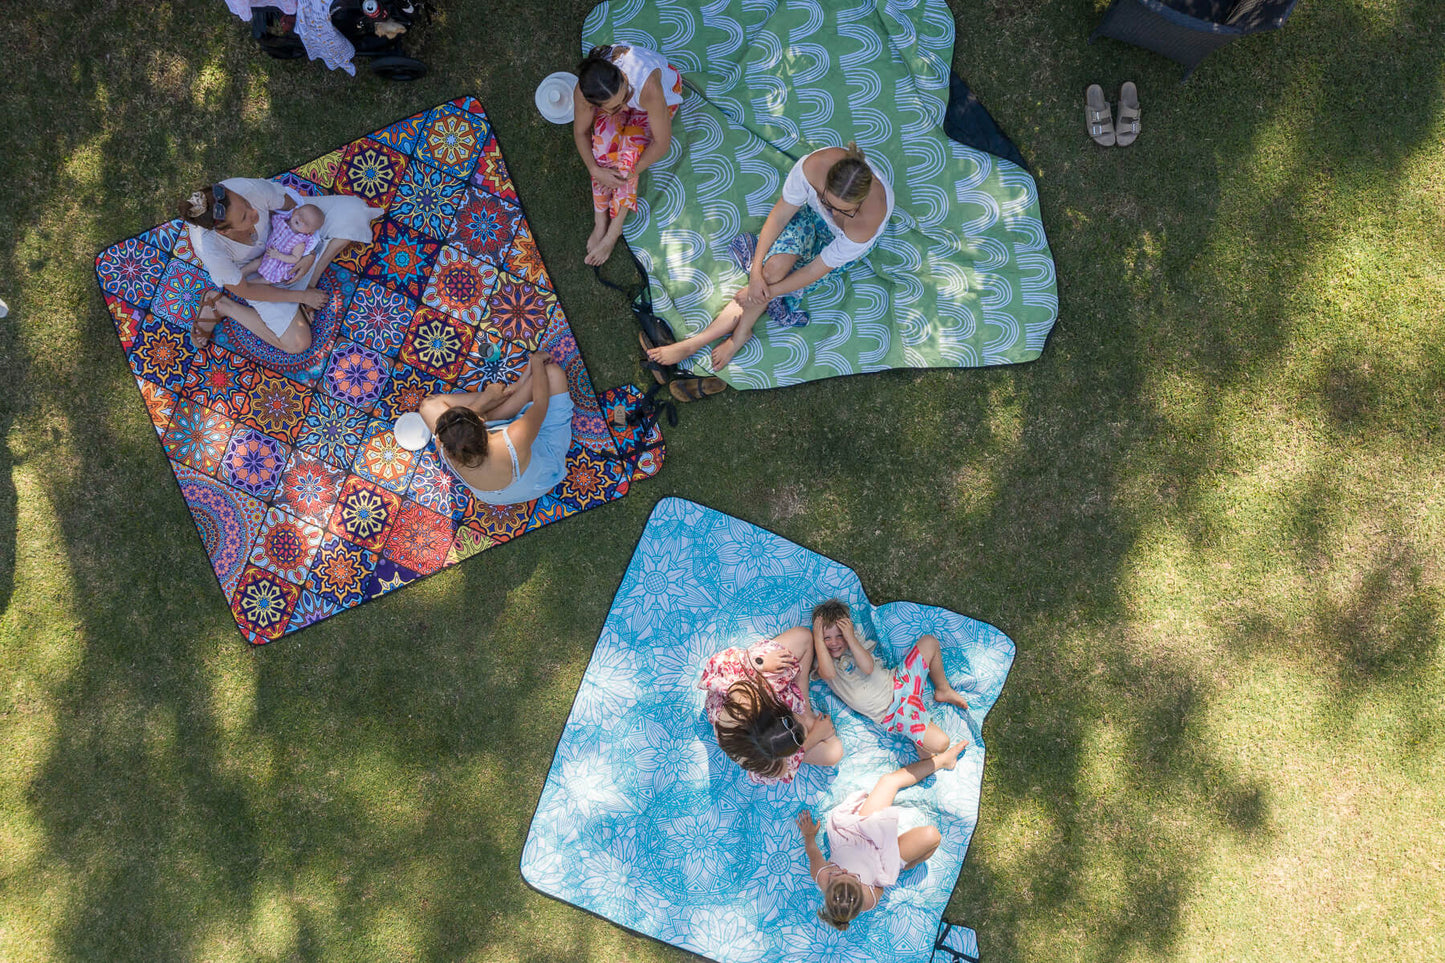 Happy Days - Recycled Picnic Blanket